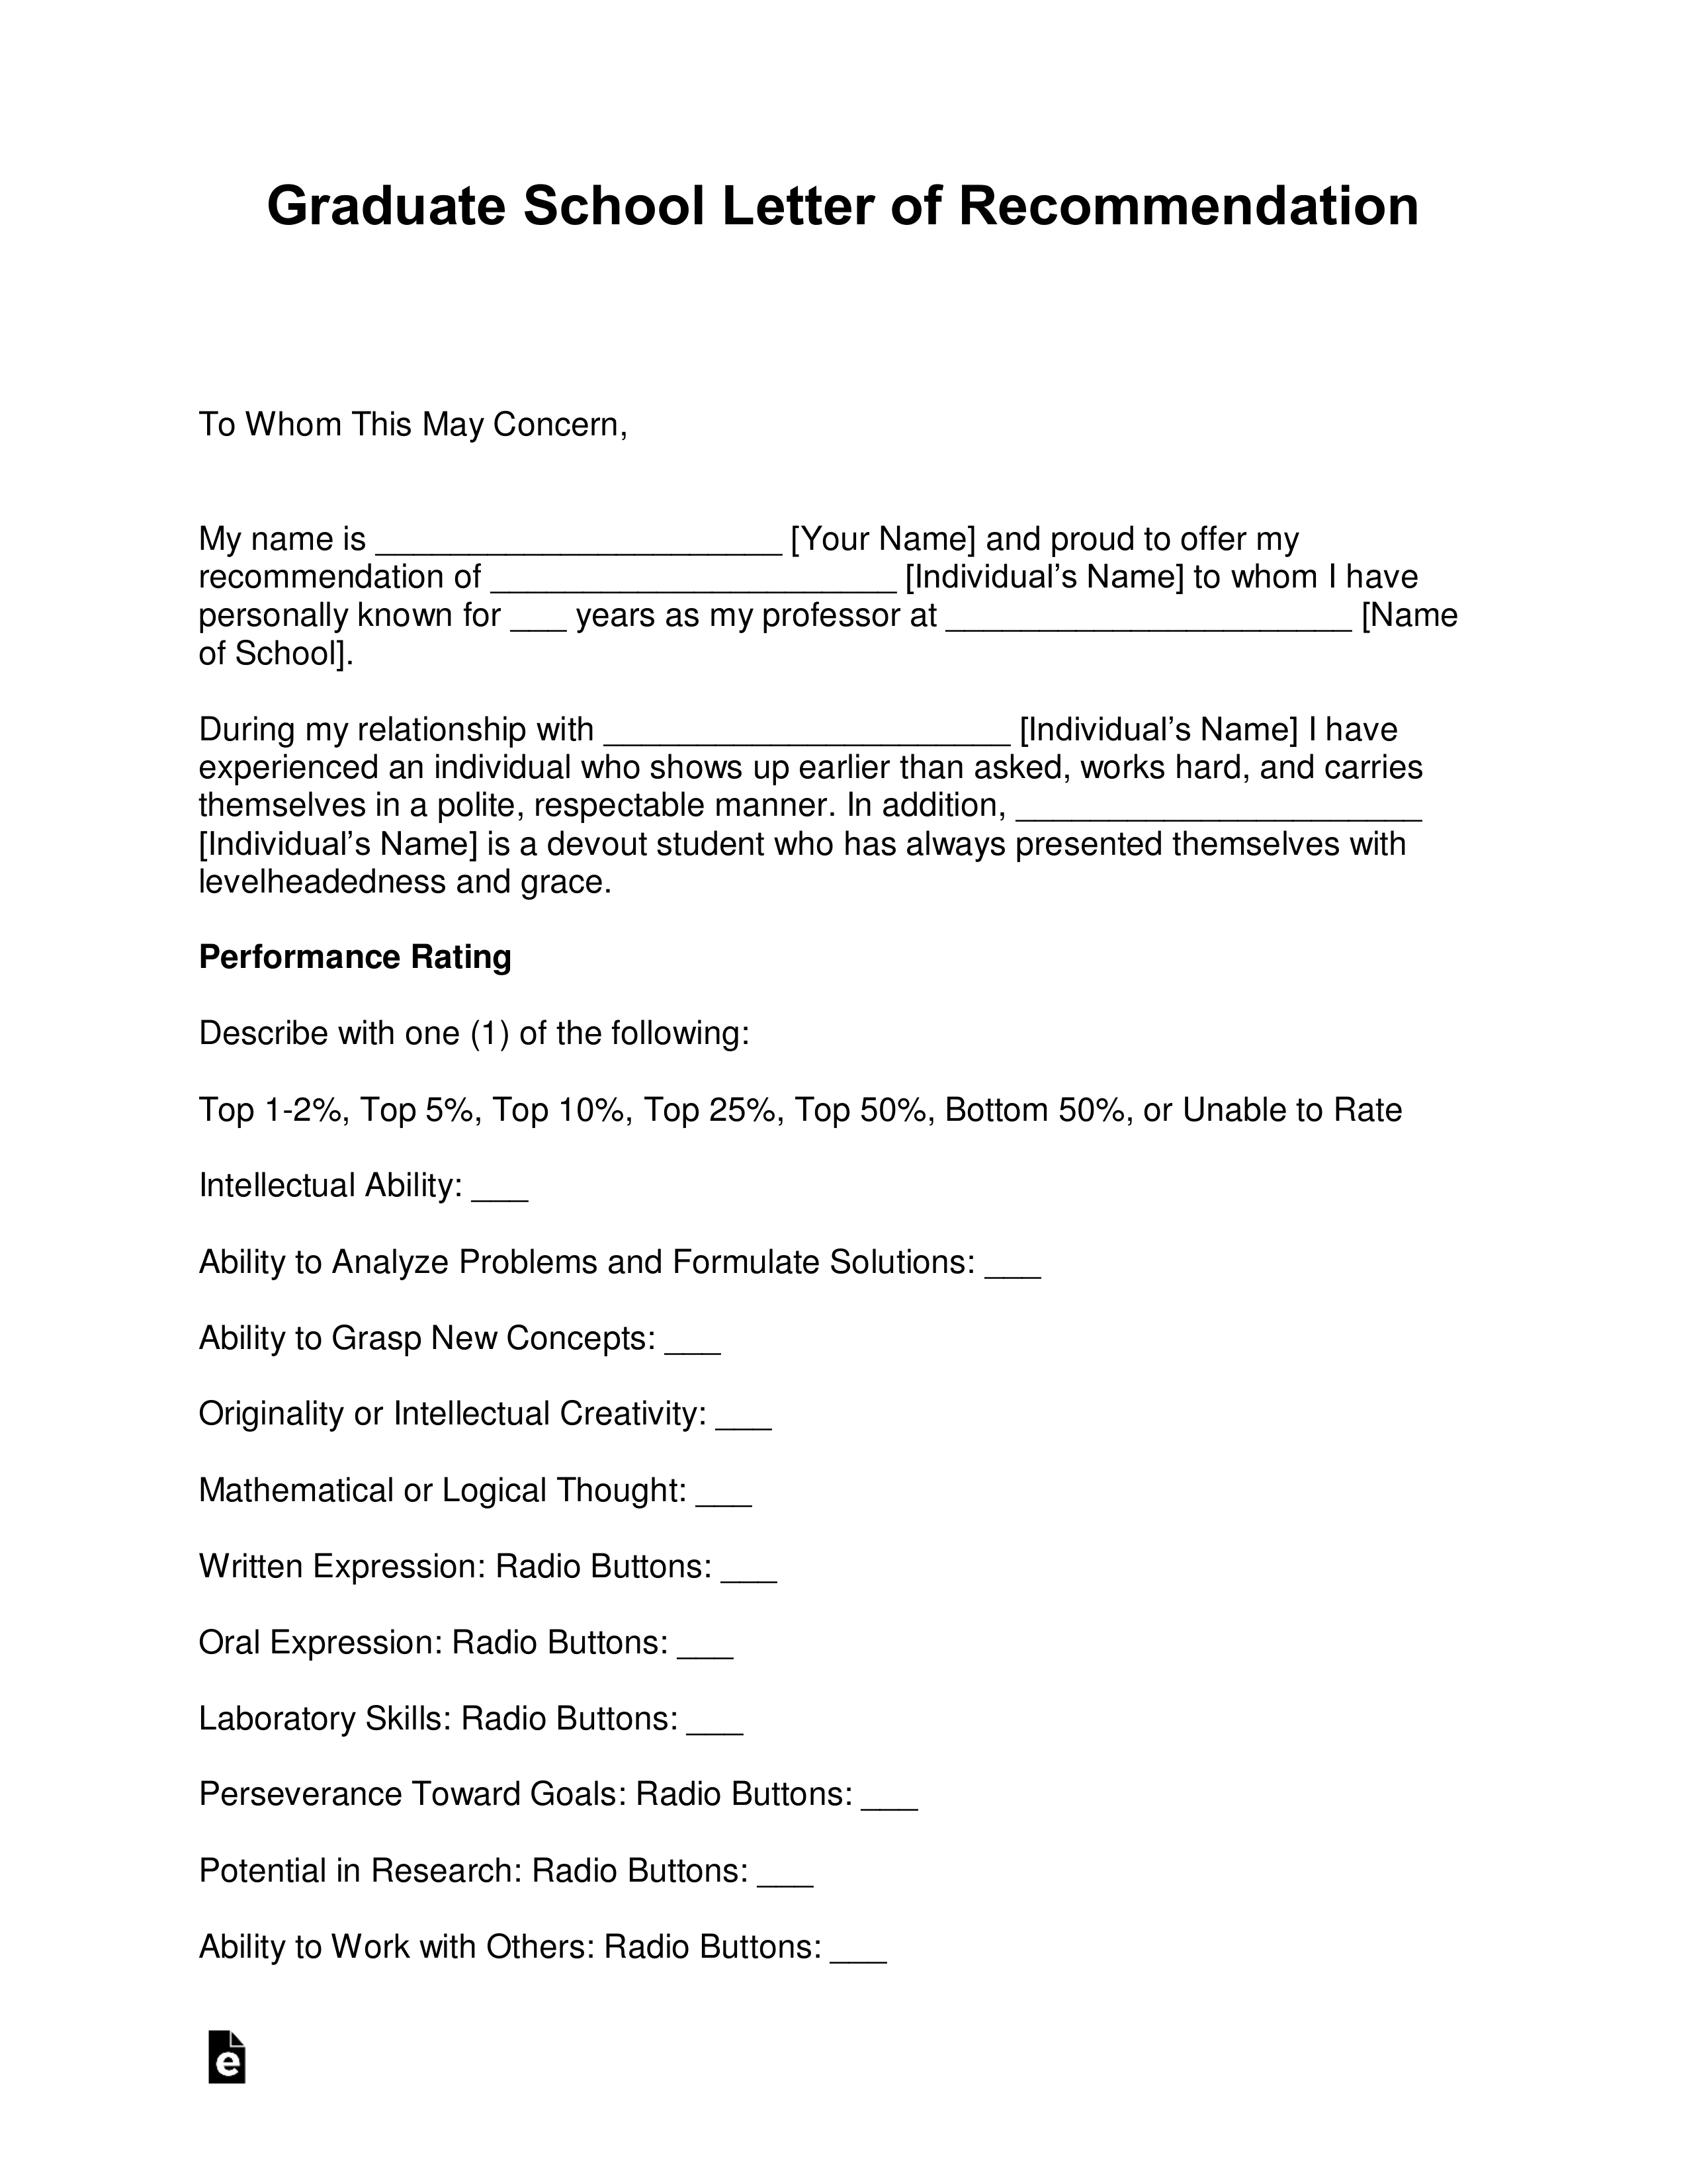 Sample Recommendation Letter From Supervisor from eforms.com